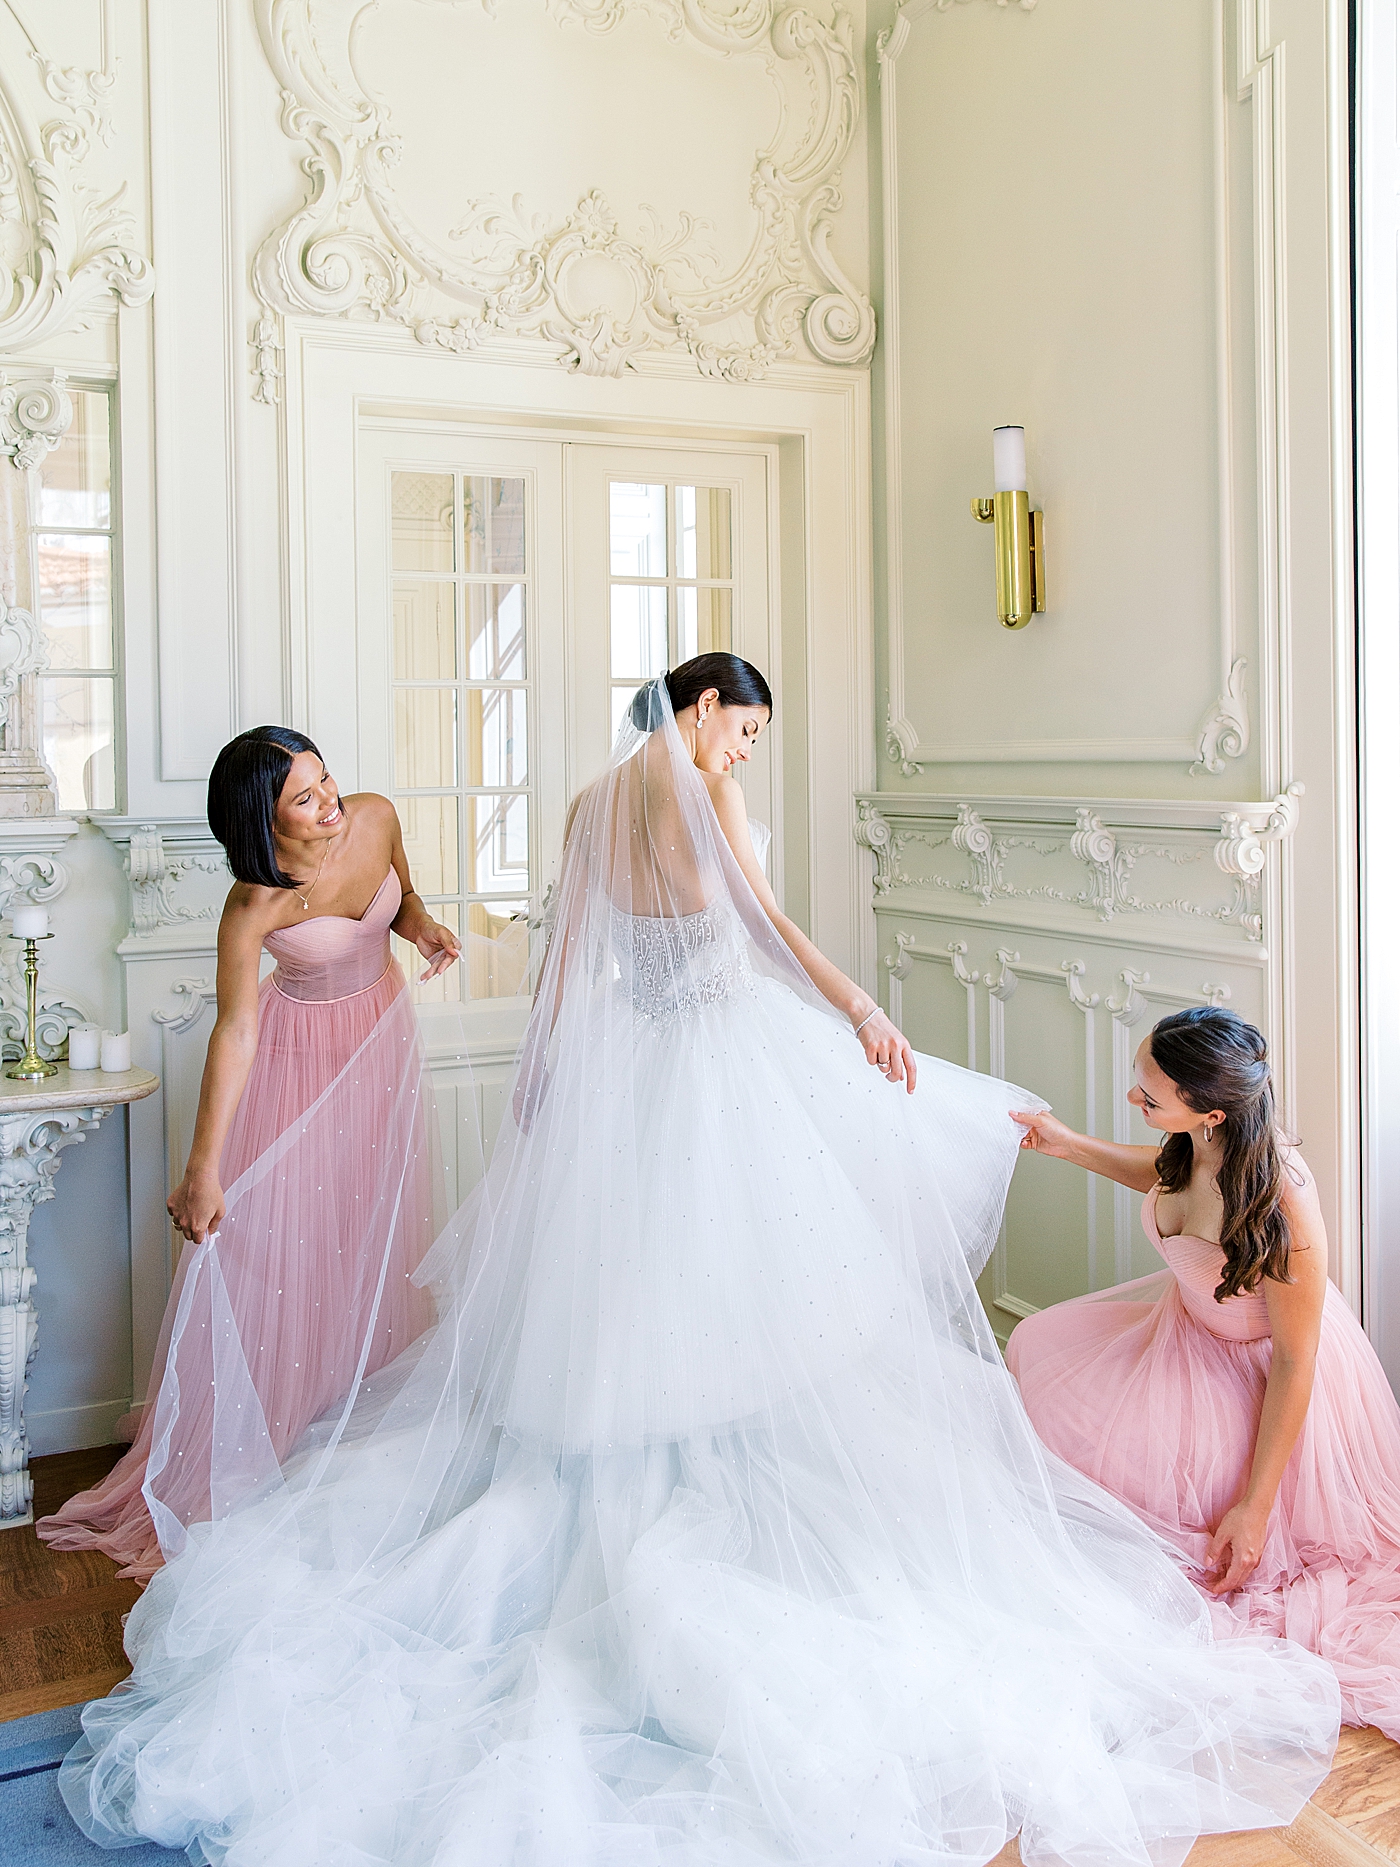 Bridesmaids in pink adjusting brides gown and veil | Image by Diane Sotero 